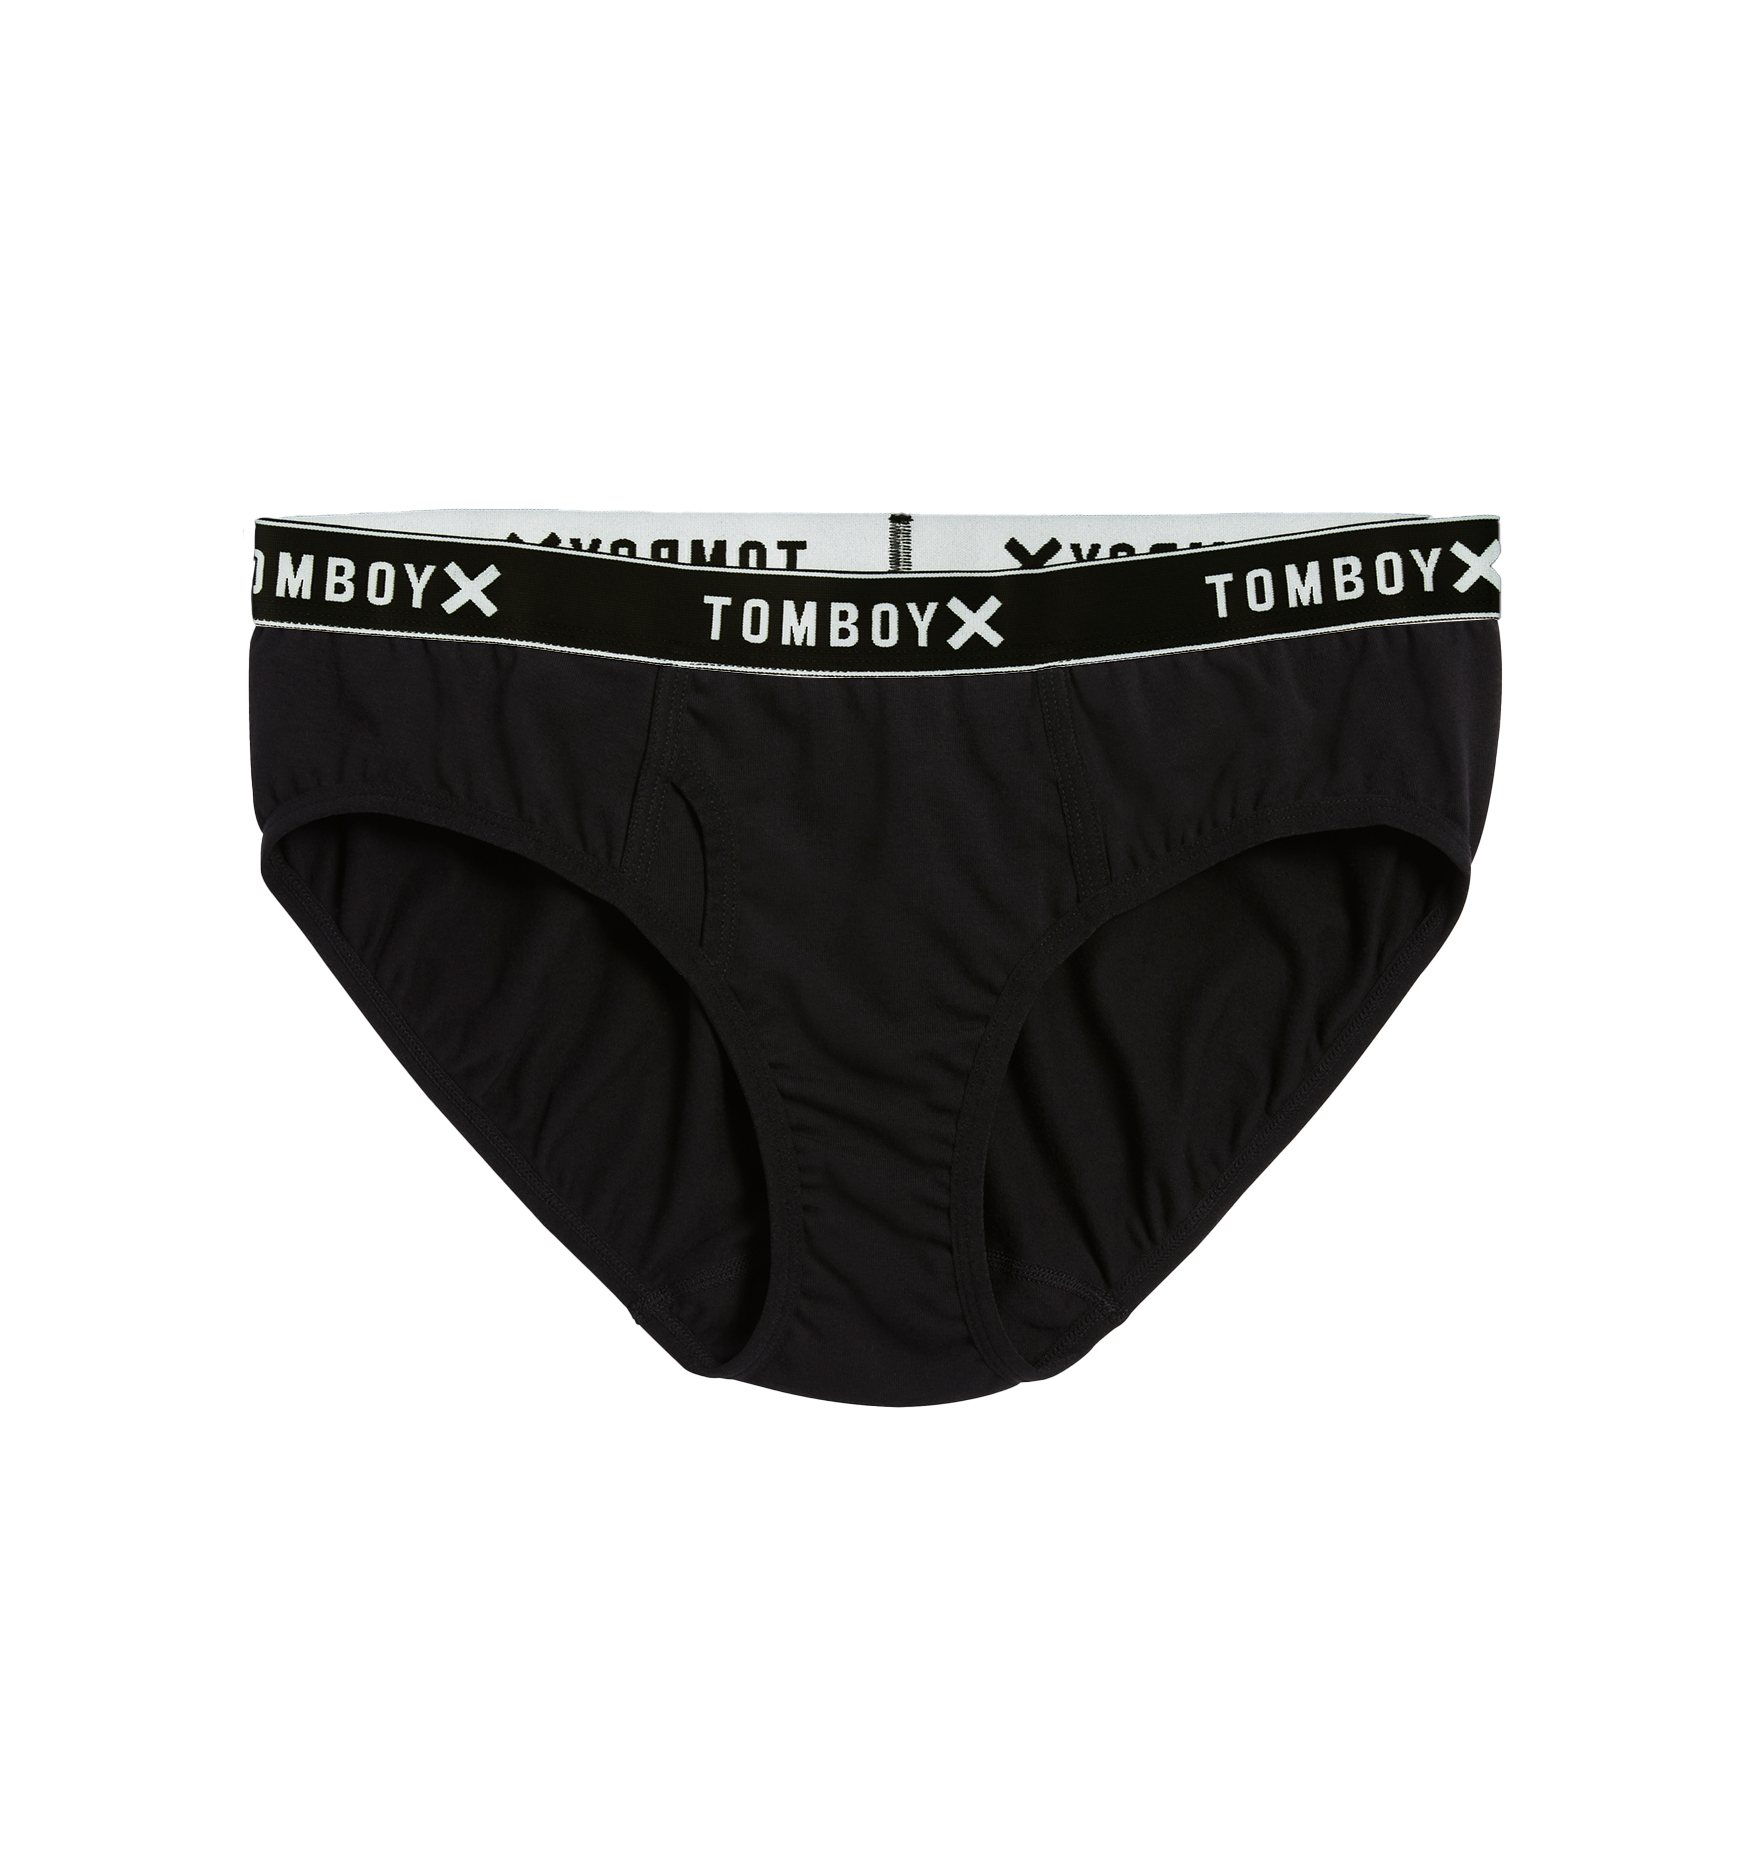 TOMBOYX Next Gen Iconic Briefs - Electric Pink